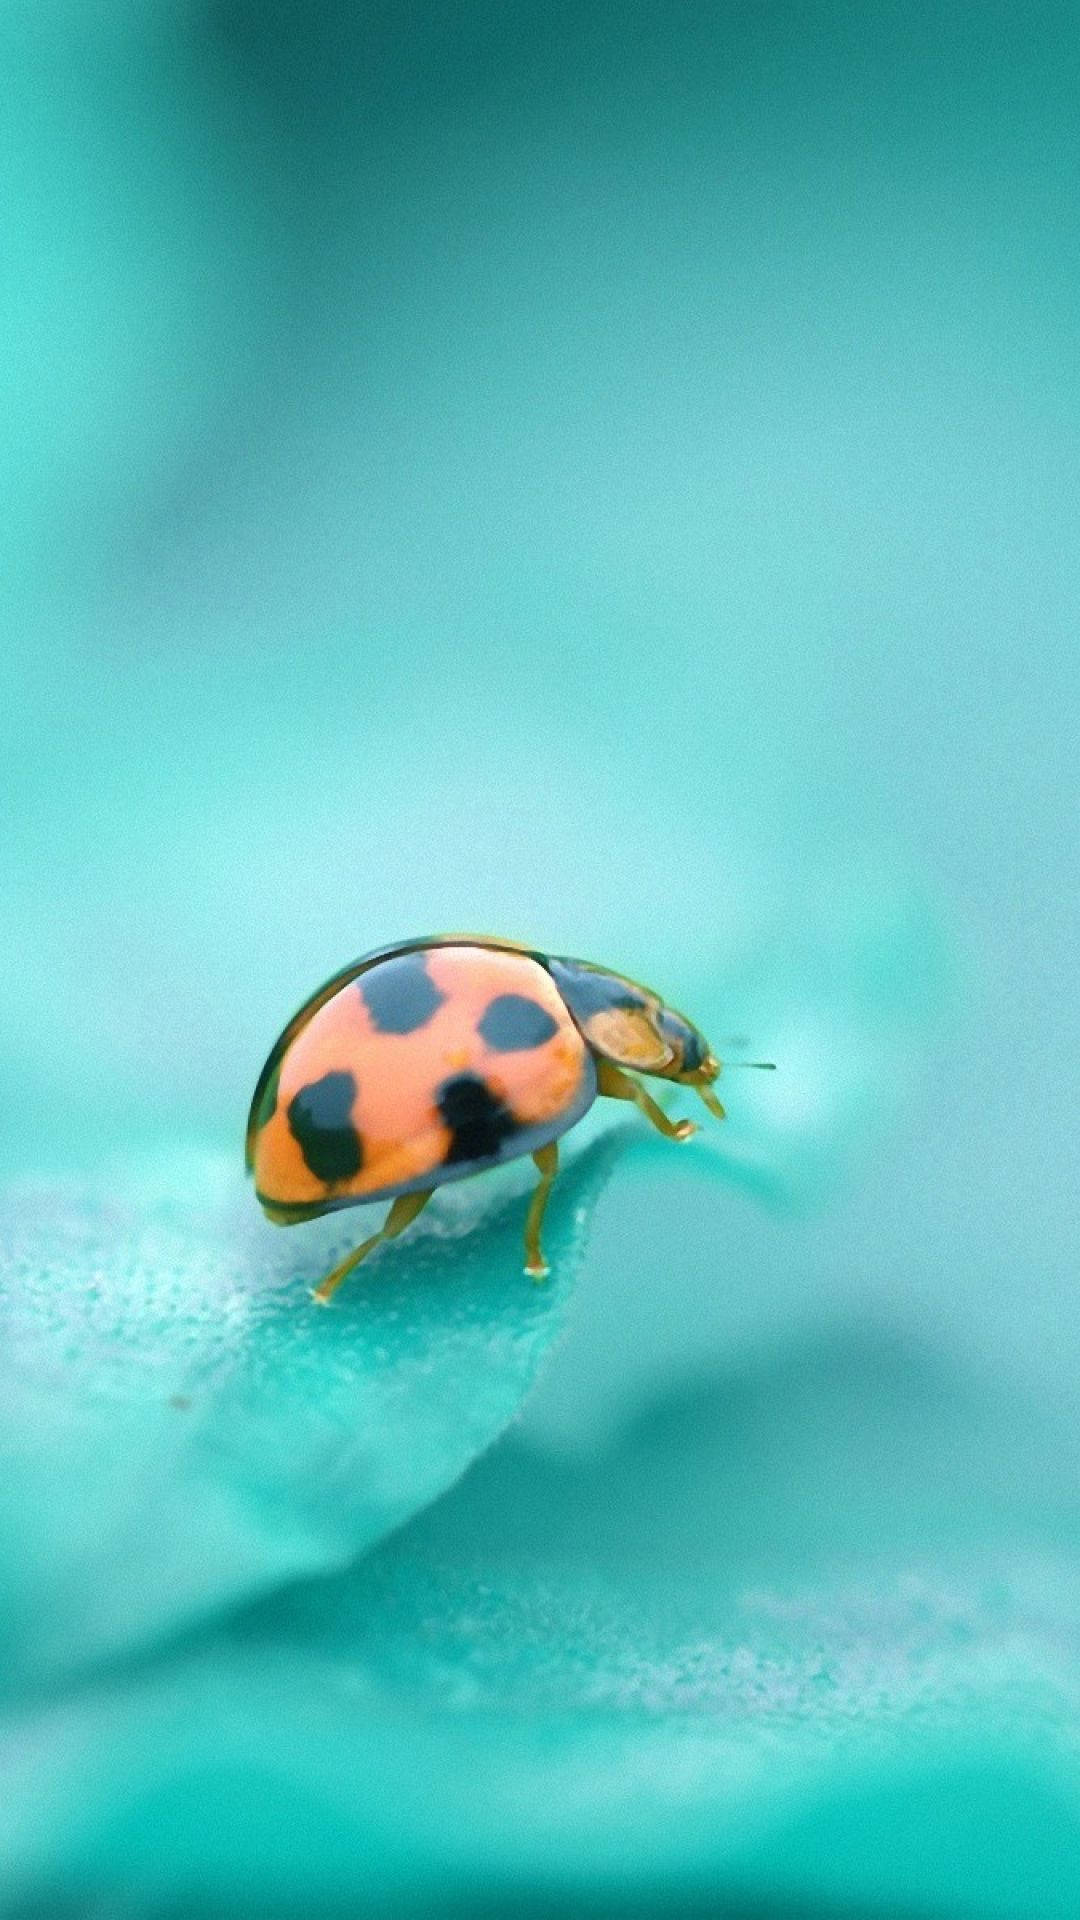 Ladybug With Red Dome-shaped Body